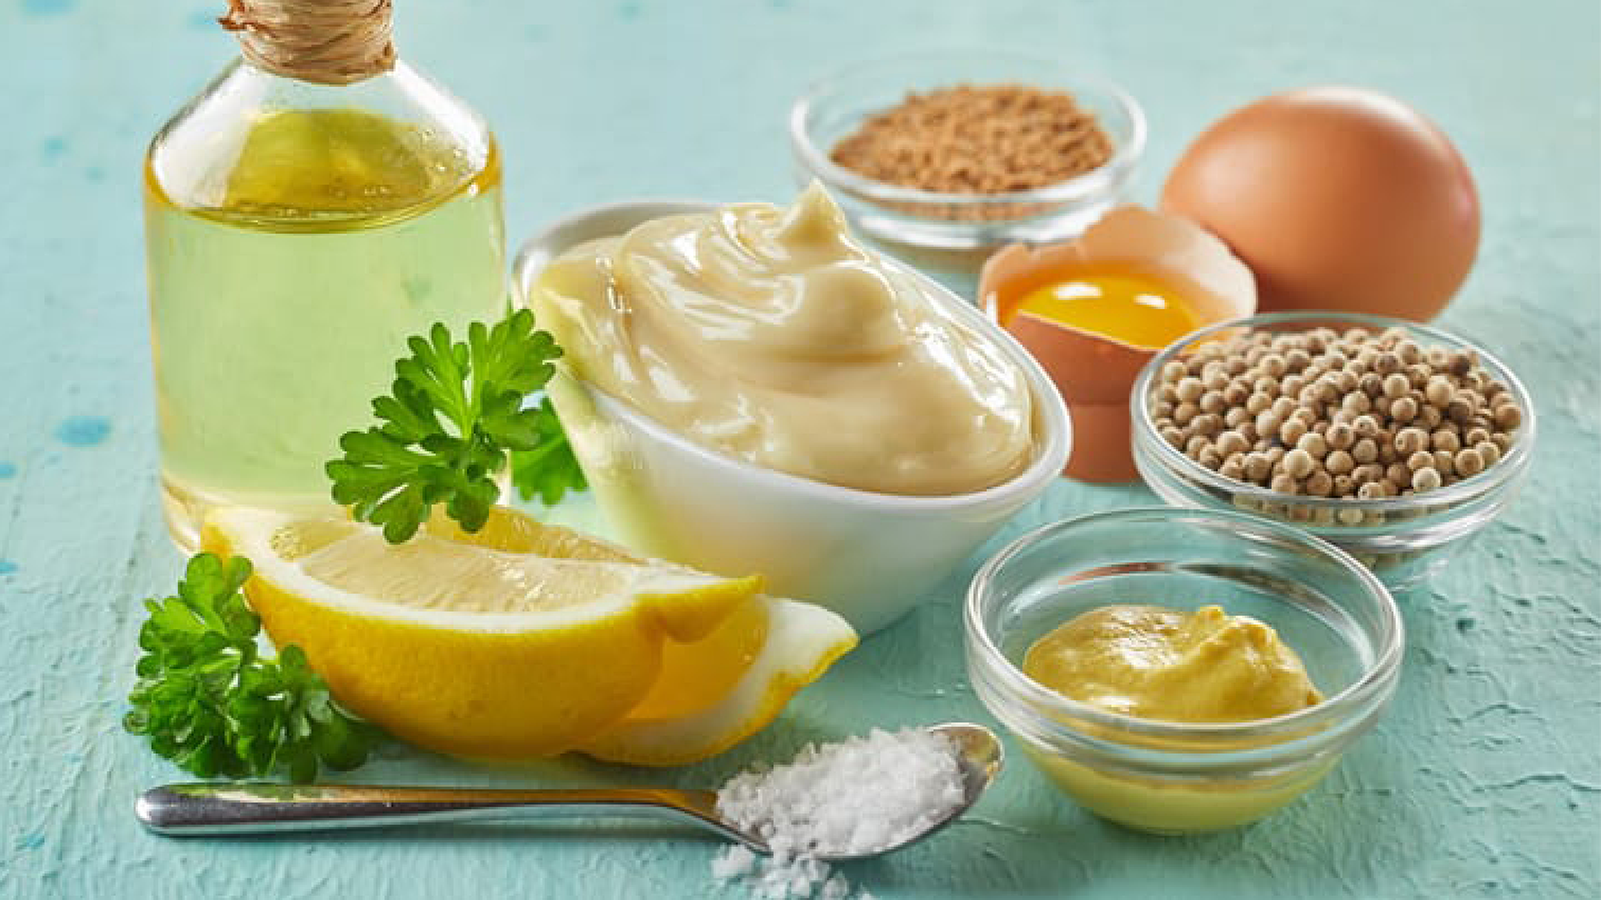 Emulsifiers: Getting right the oil-water relationship in foods